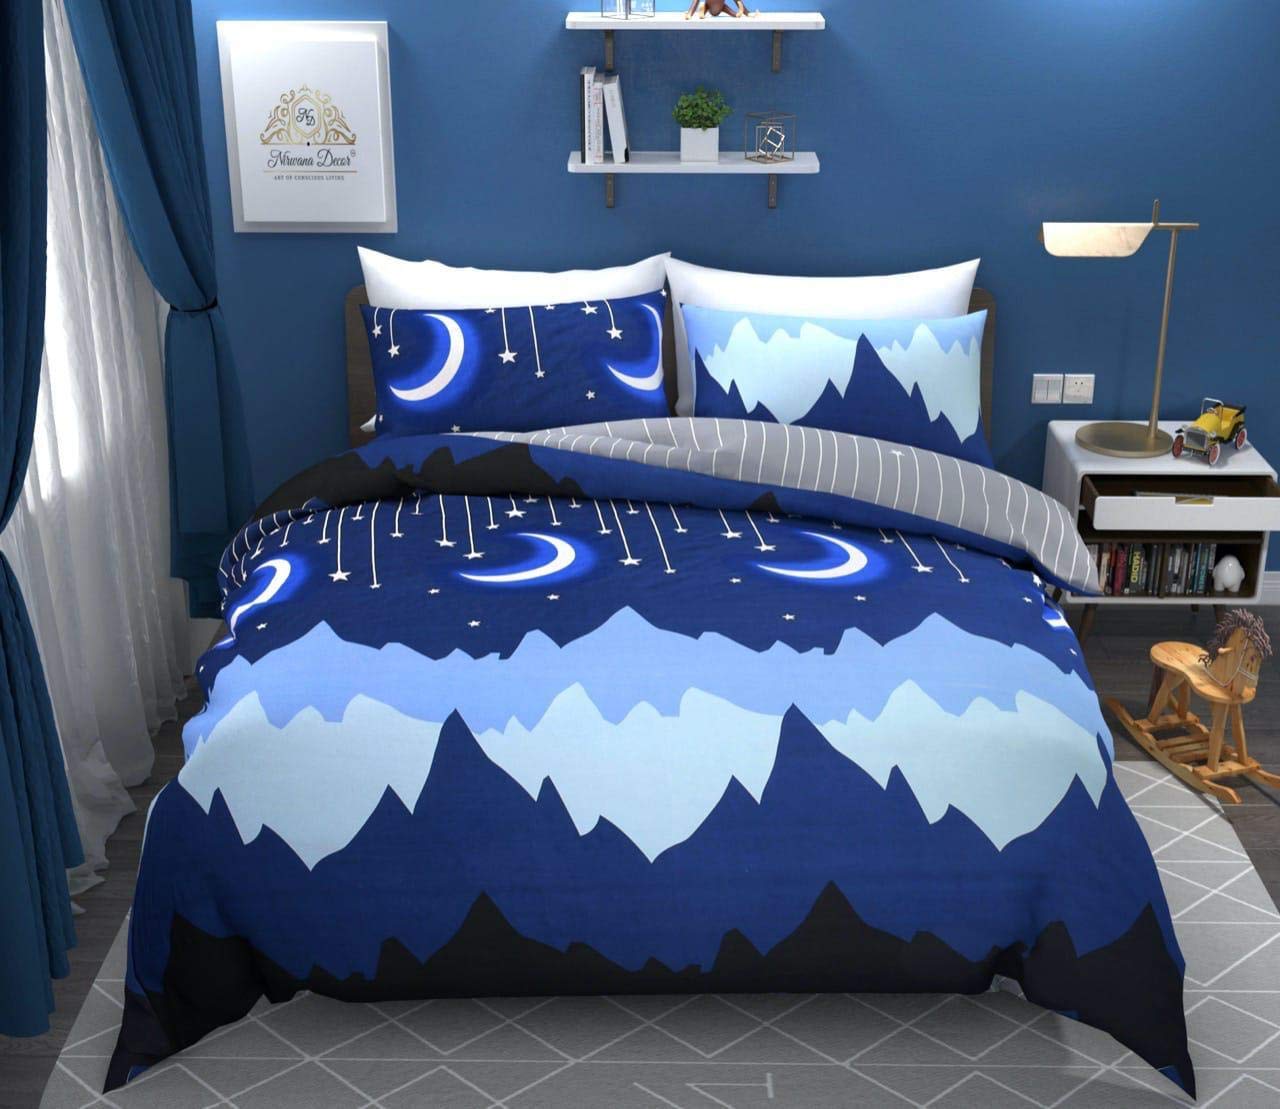 TIB 130 GSM Polycotton Kids Galaxy Pattern Bedsheet for Double Bed with 2 Pillow Covers,90x100 Inch, Blue